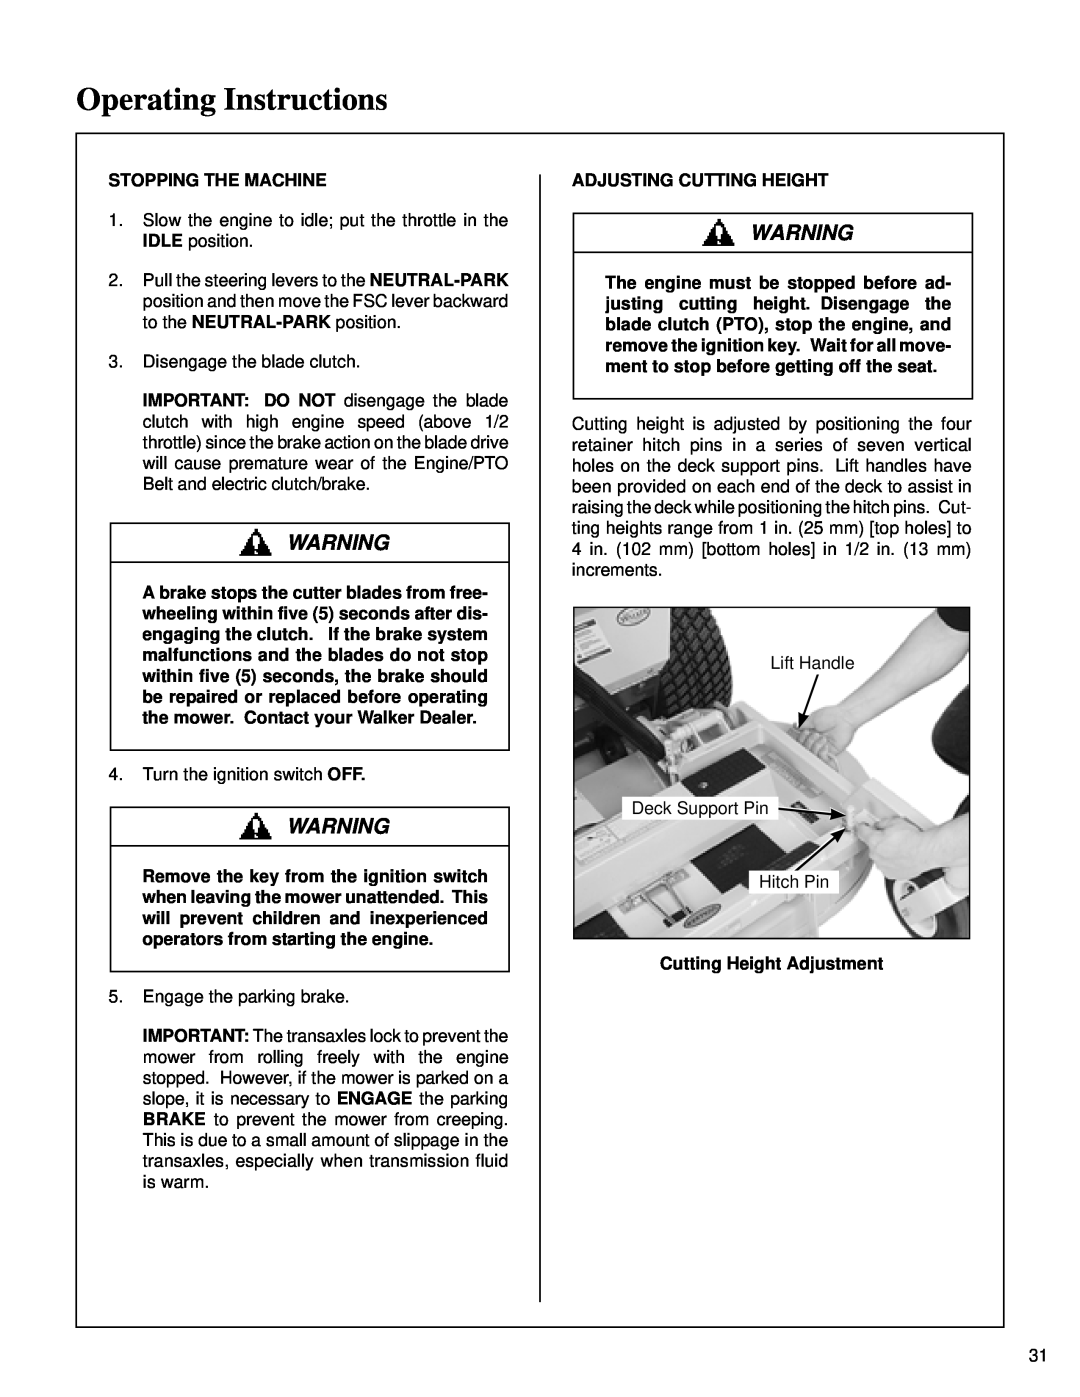 Briggs & Stratton MB (18 HP) owner manual Operating Instructions, Stopping The Machine, Adjusting Cutting Height 